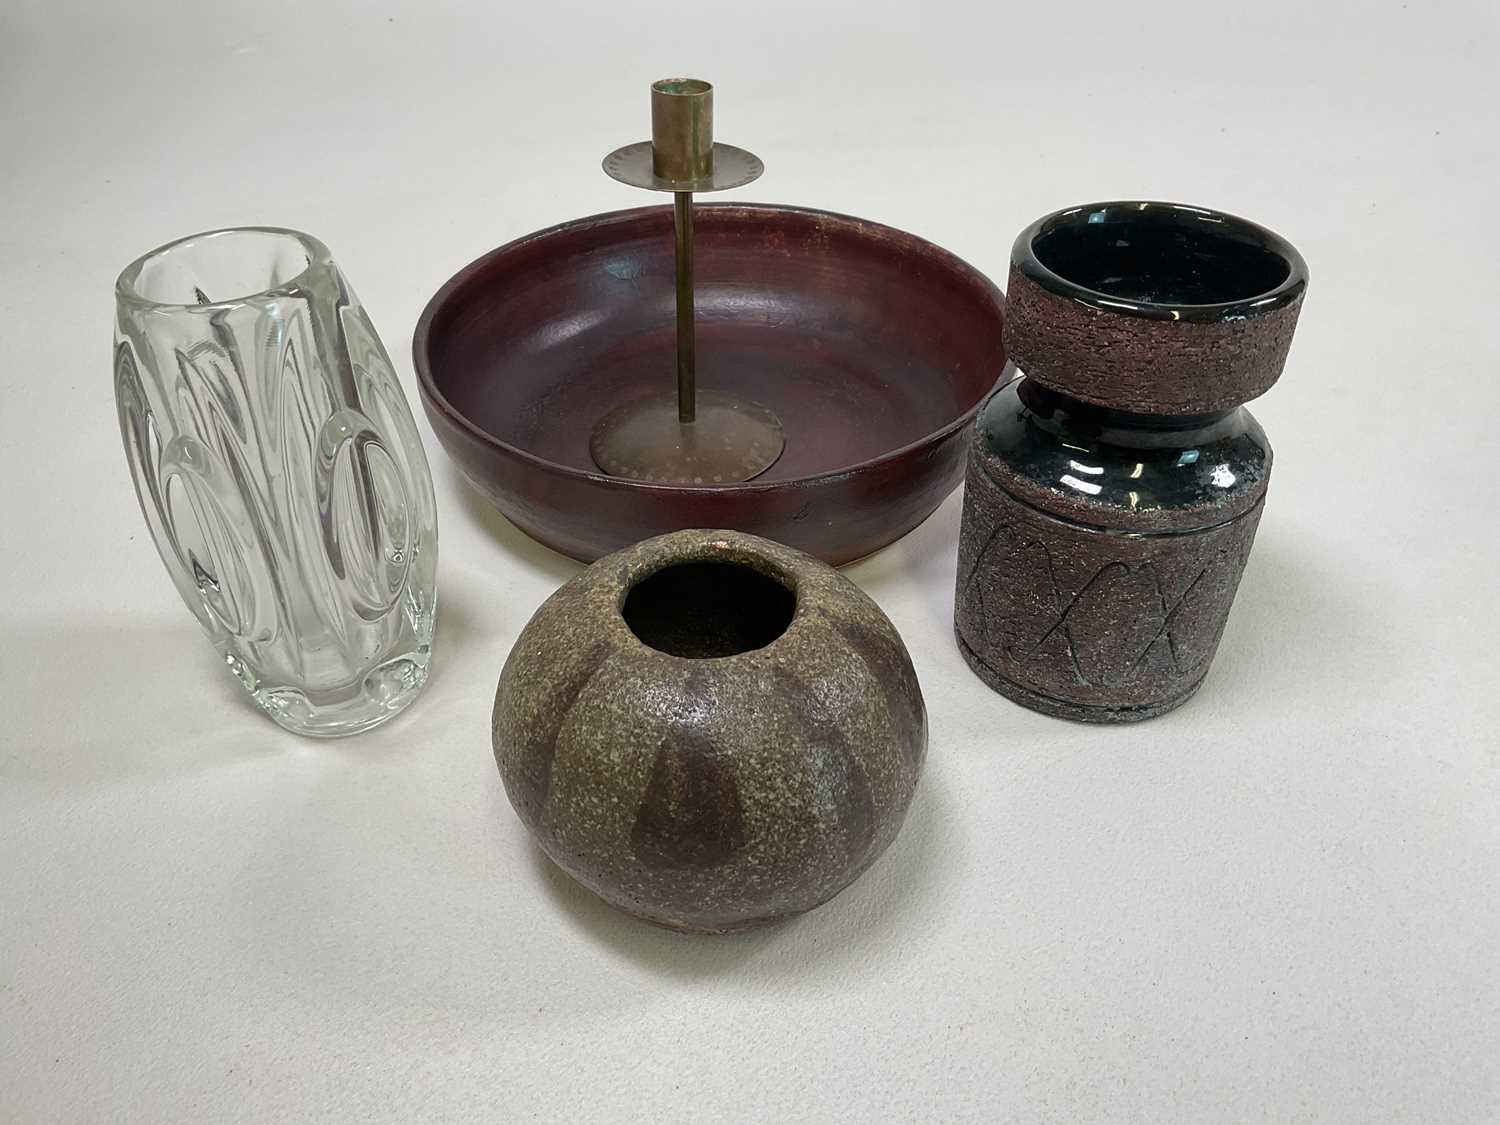 A Brutalist mid century vase by Gabriel Keramic, designed by Eke Bjeren, with other items comprising